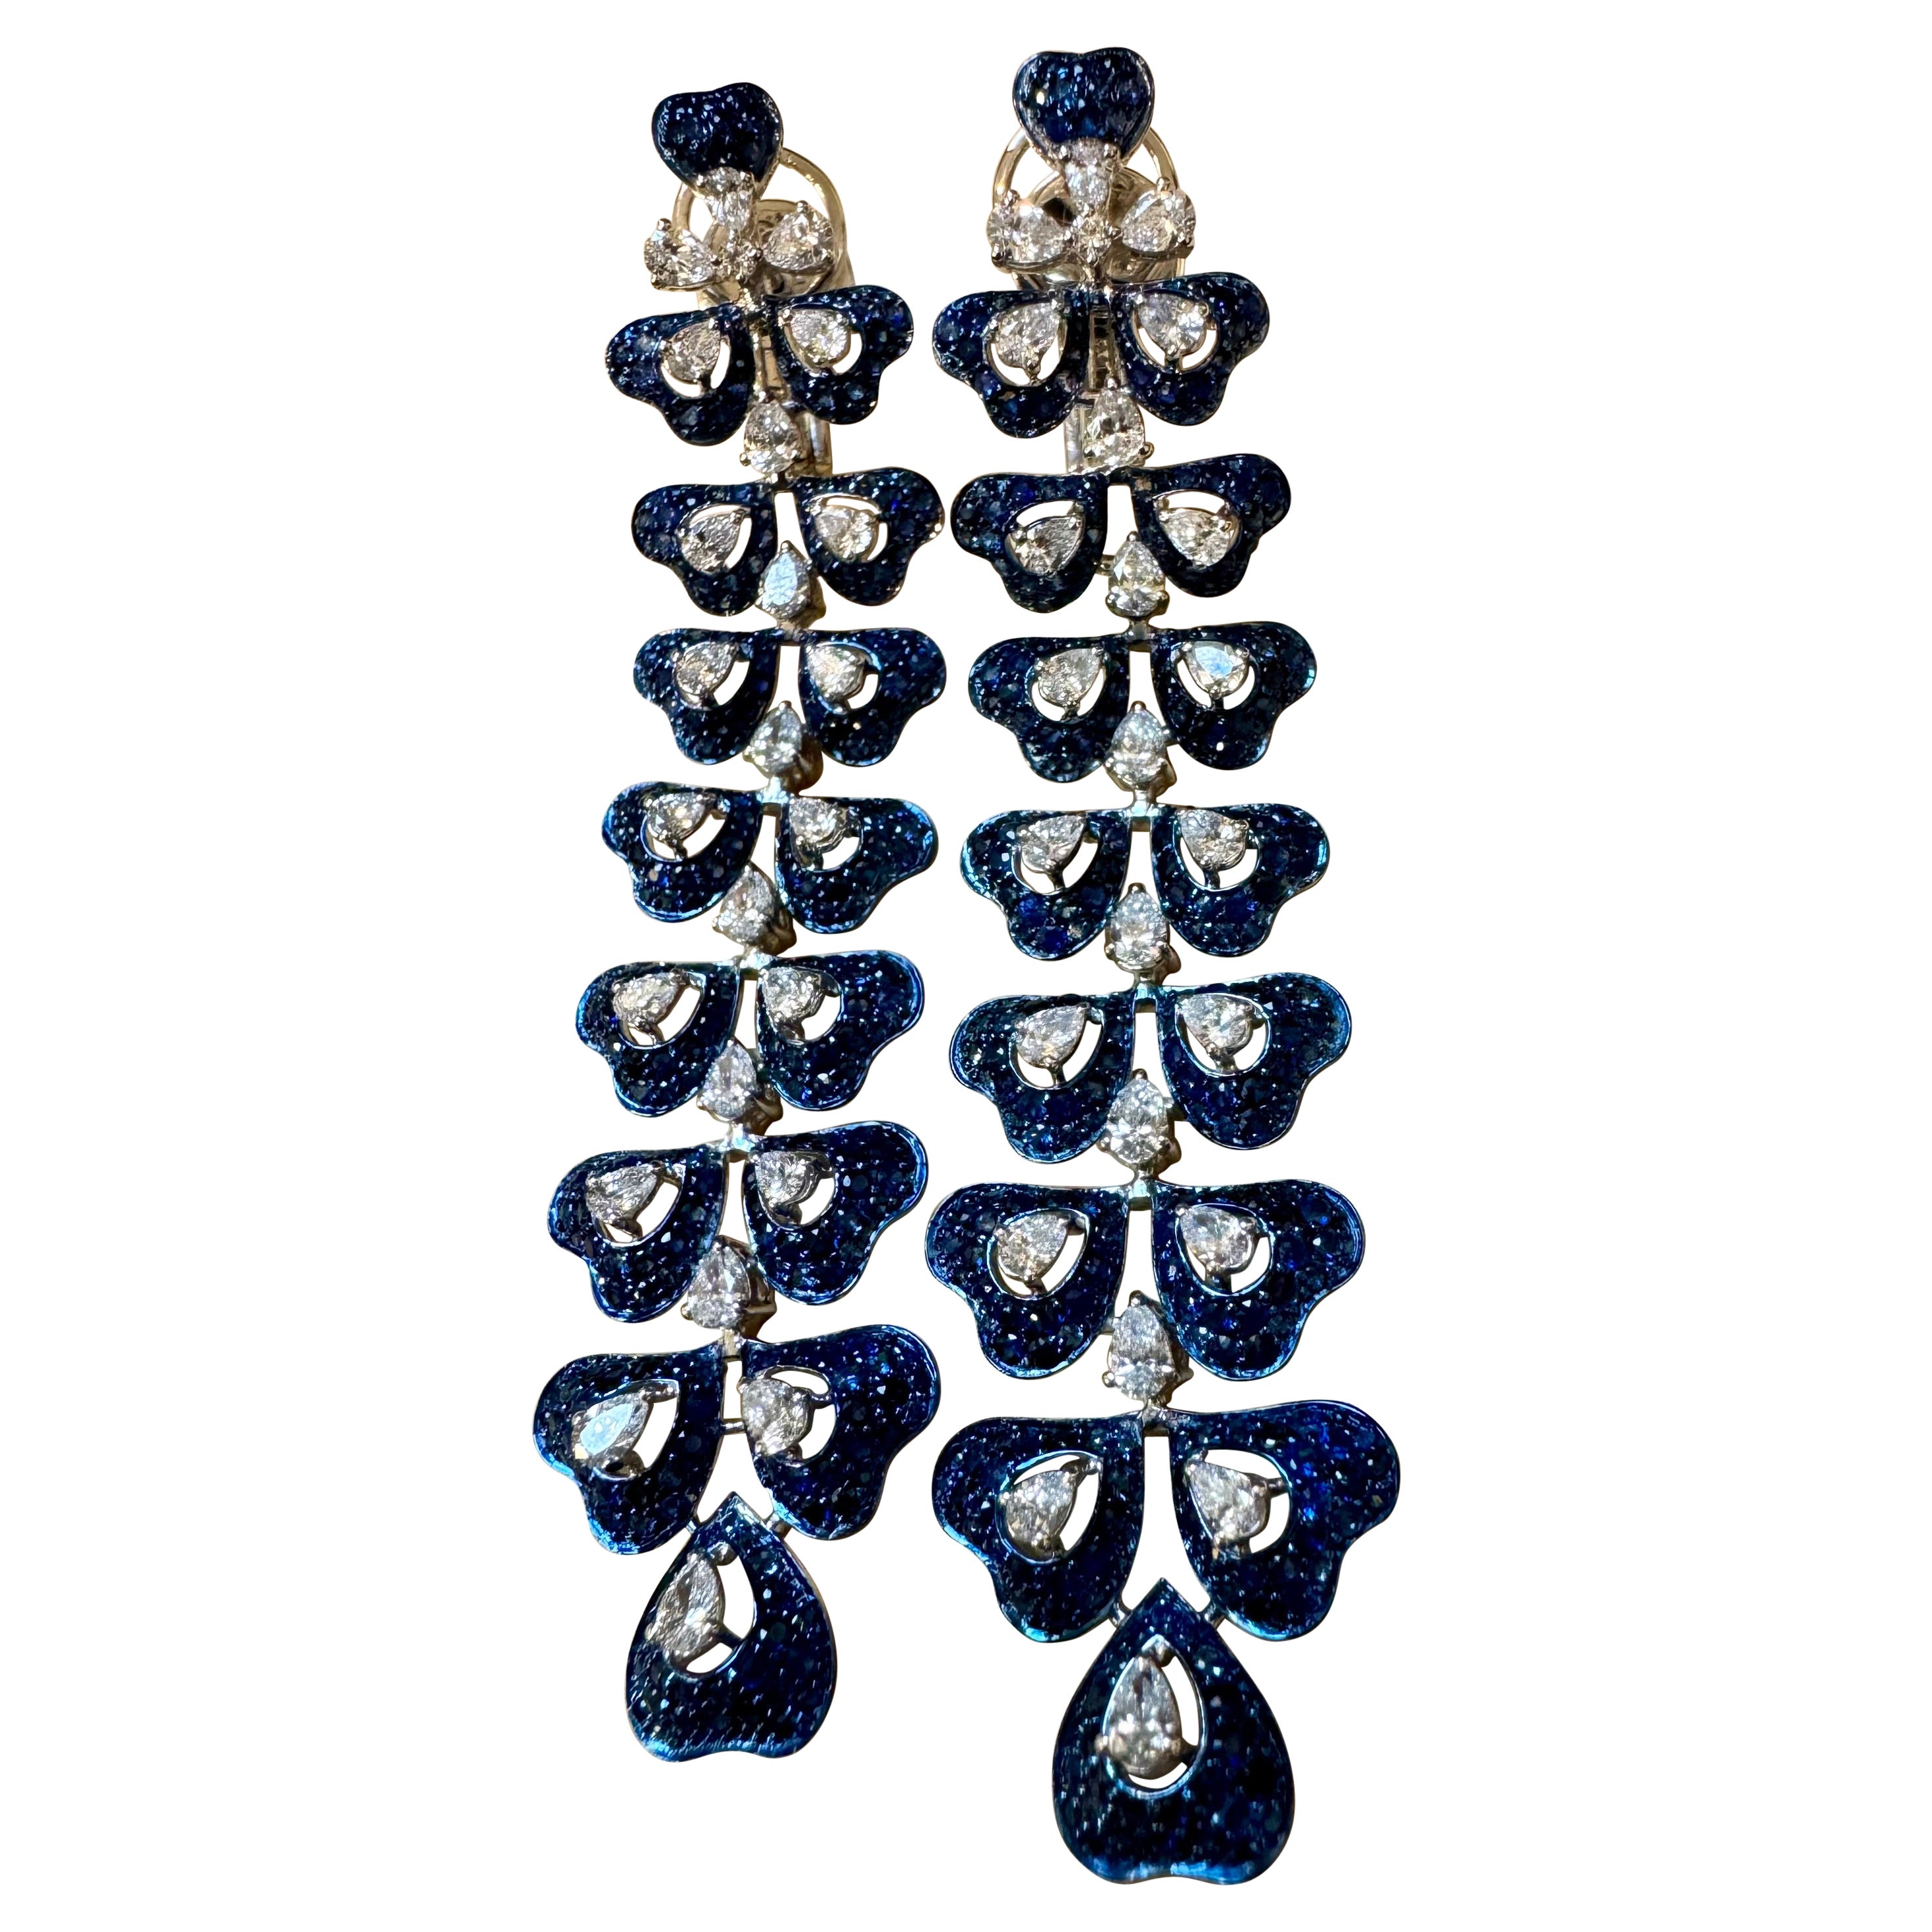  6 Ct Natural Blue Sapphire & 3 Ct Diamond hanging Earrings 18Kt White Gold 3" For Sale